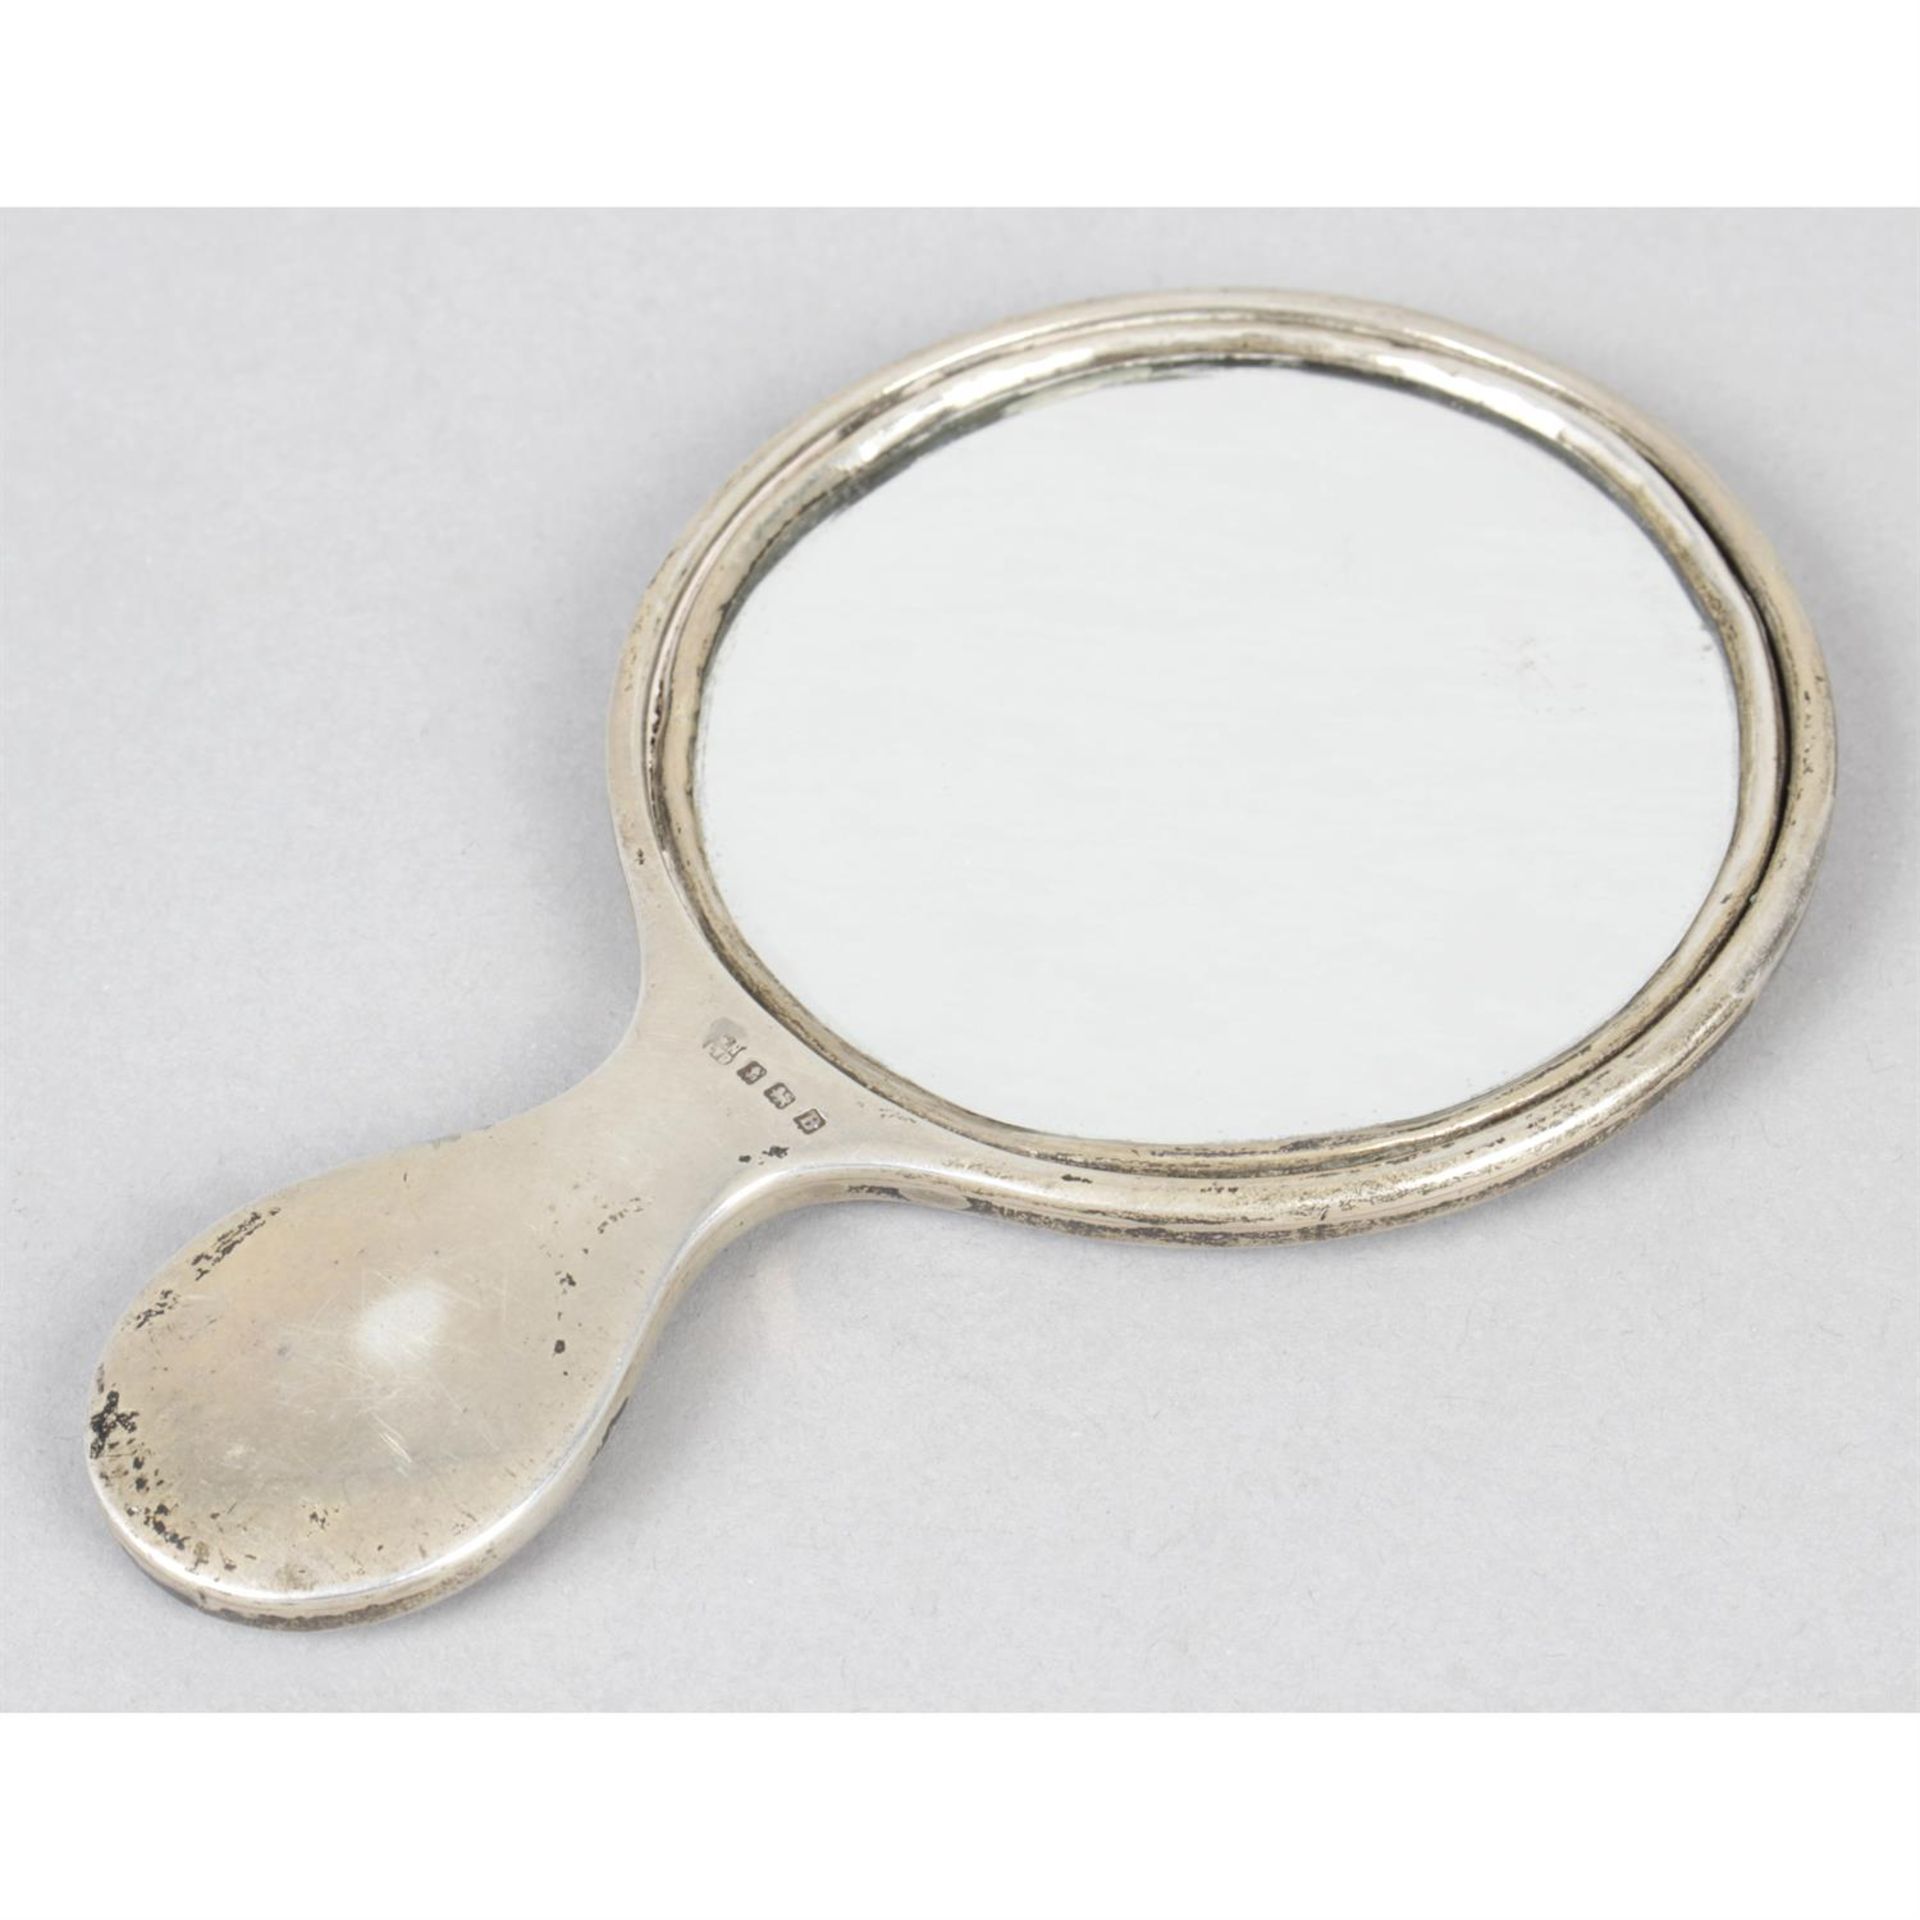 A 1920's silver mounted and enamel small hand-held mirror. - Image 2 of 3